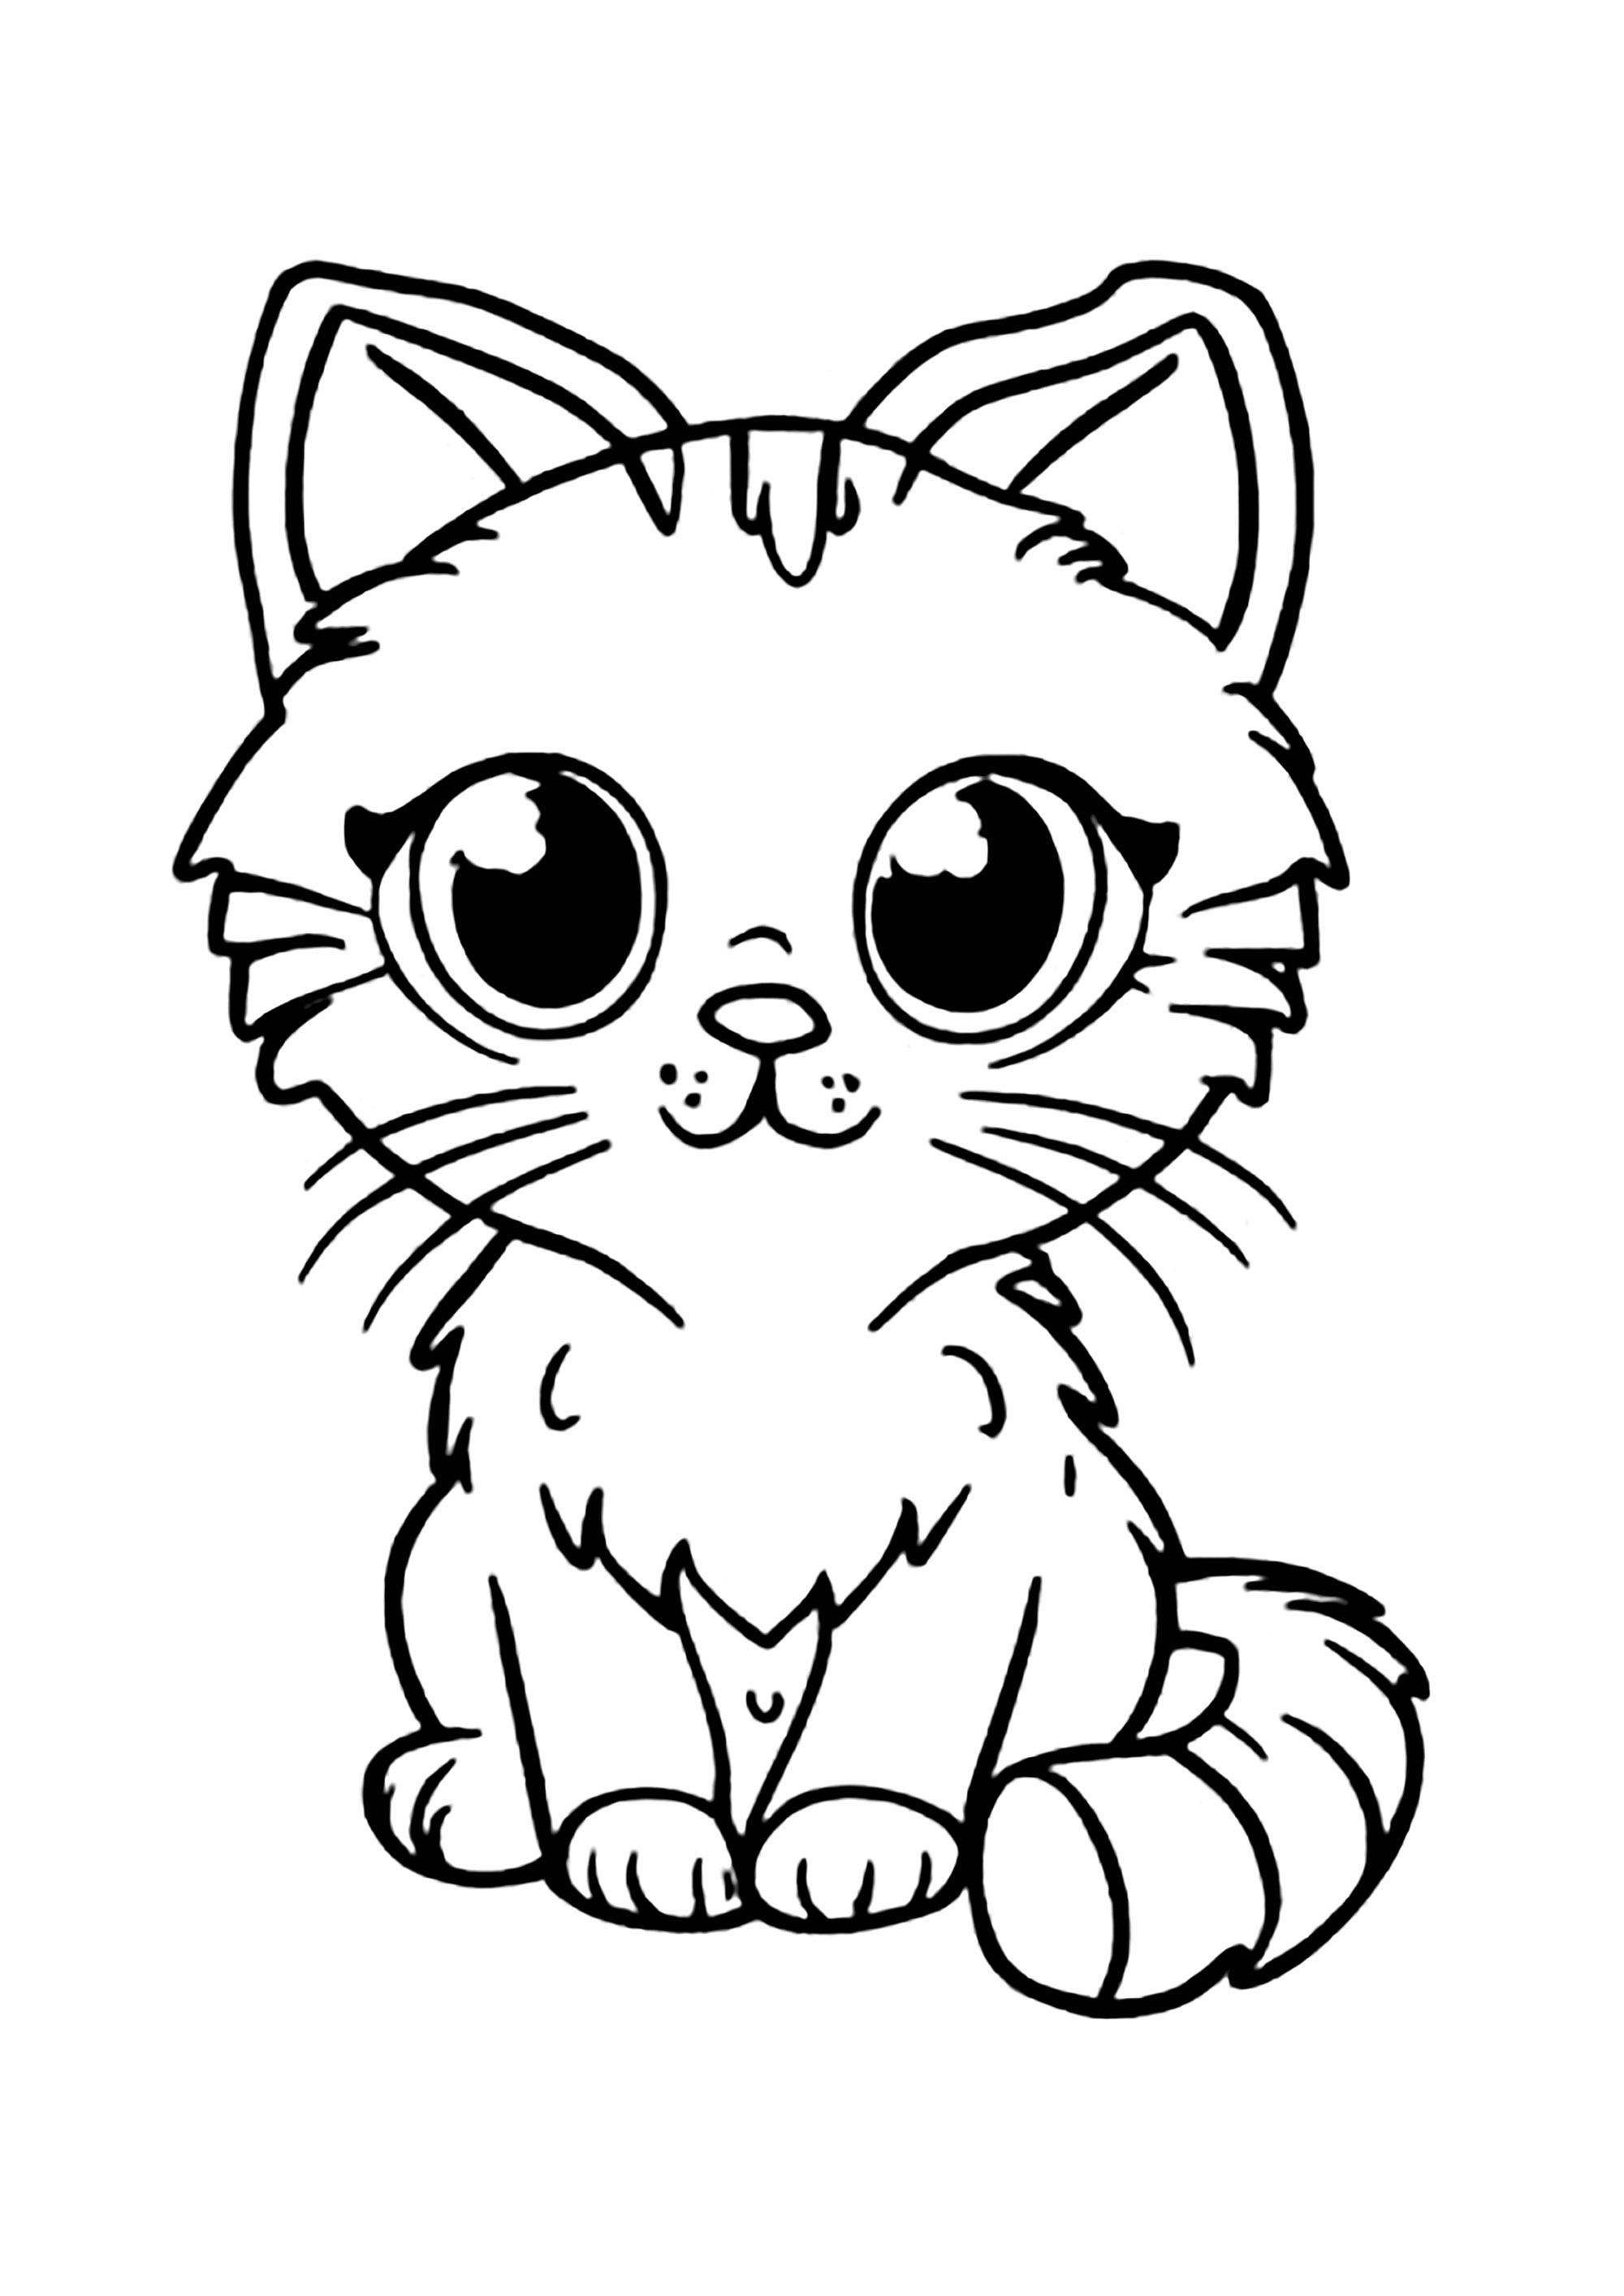 https://www.justcolor.net/kids/wp-content/uploads/sites/12/nggallery/cats/coloring-pages-for-children-cats-69940.jpeg